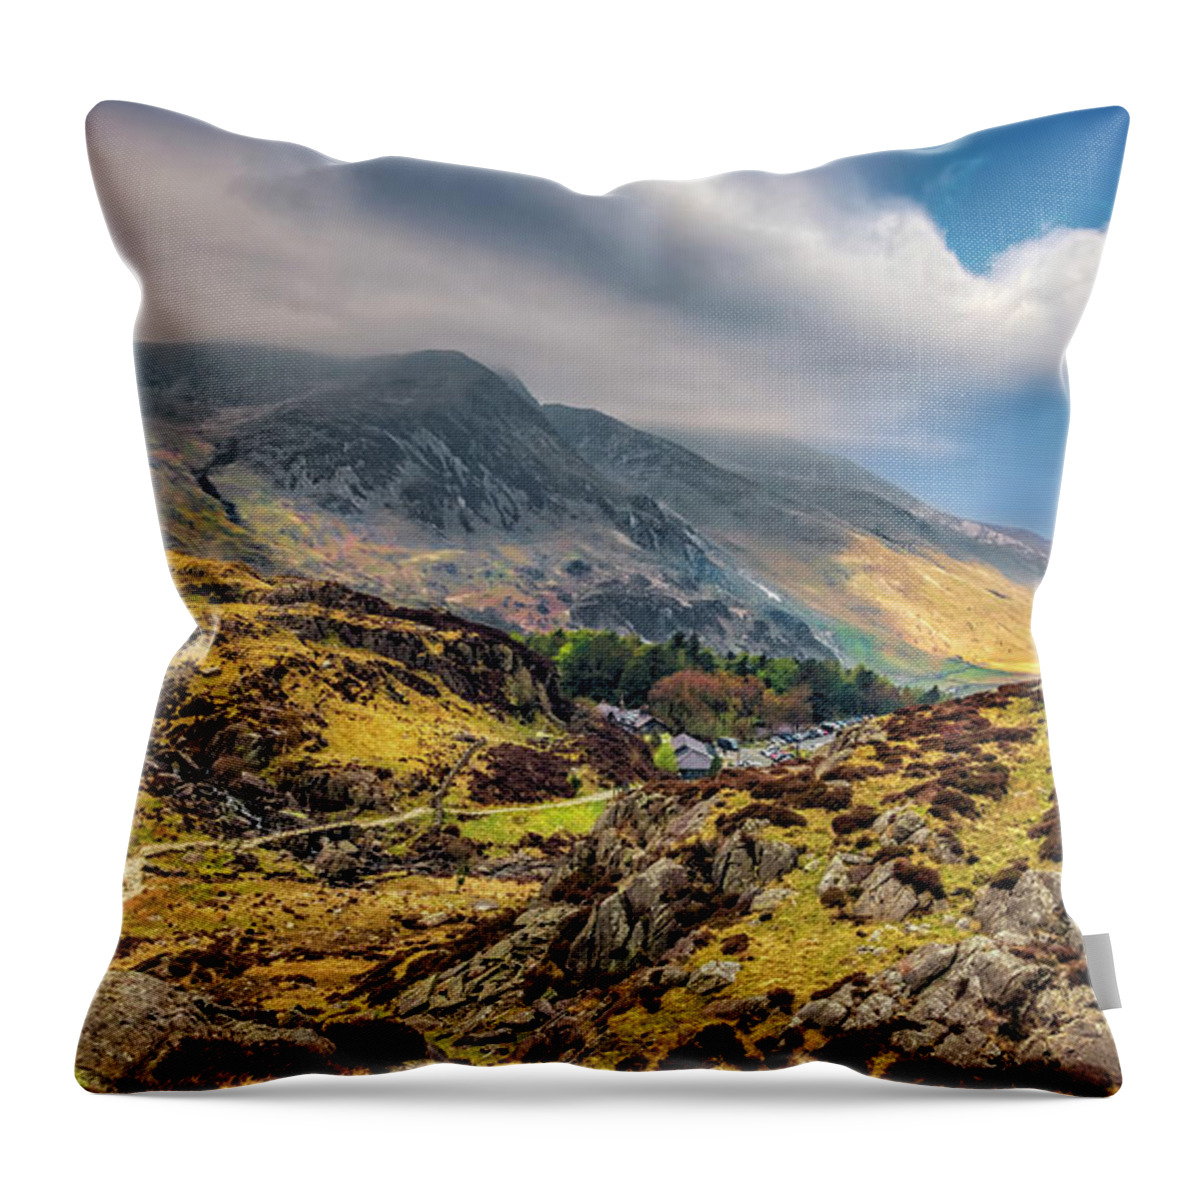 Cwm Idwal Throw Pillow featuring the photograph Ogwen Snowdonia Wales by Adrian Evans